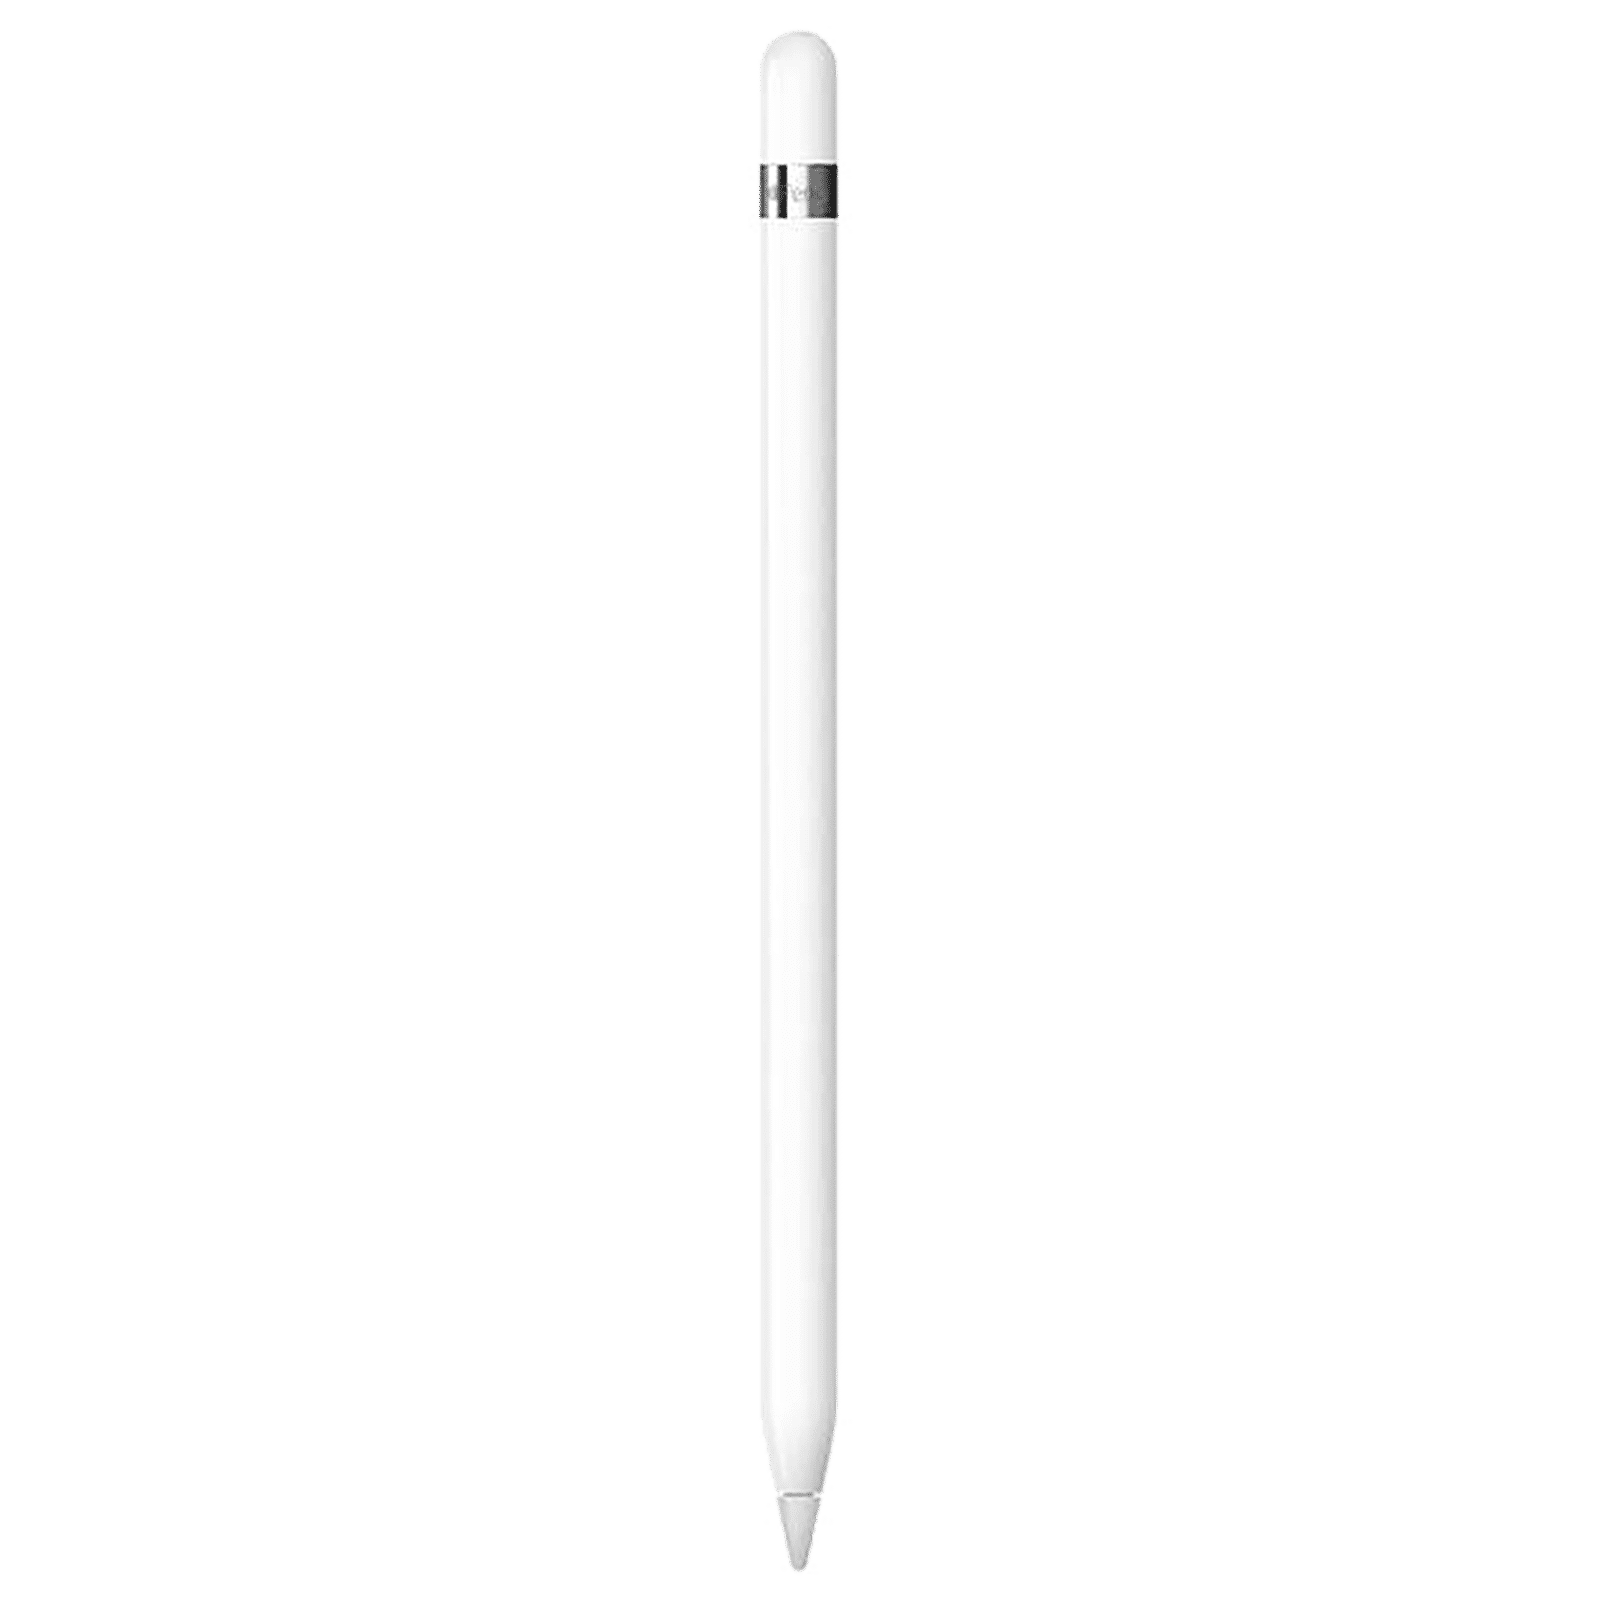 Buy Apple Pencil 1st Generation for iPad Pro (MK0C2ZM/A, White 